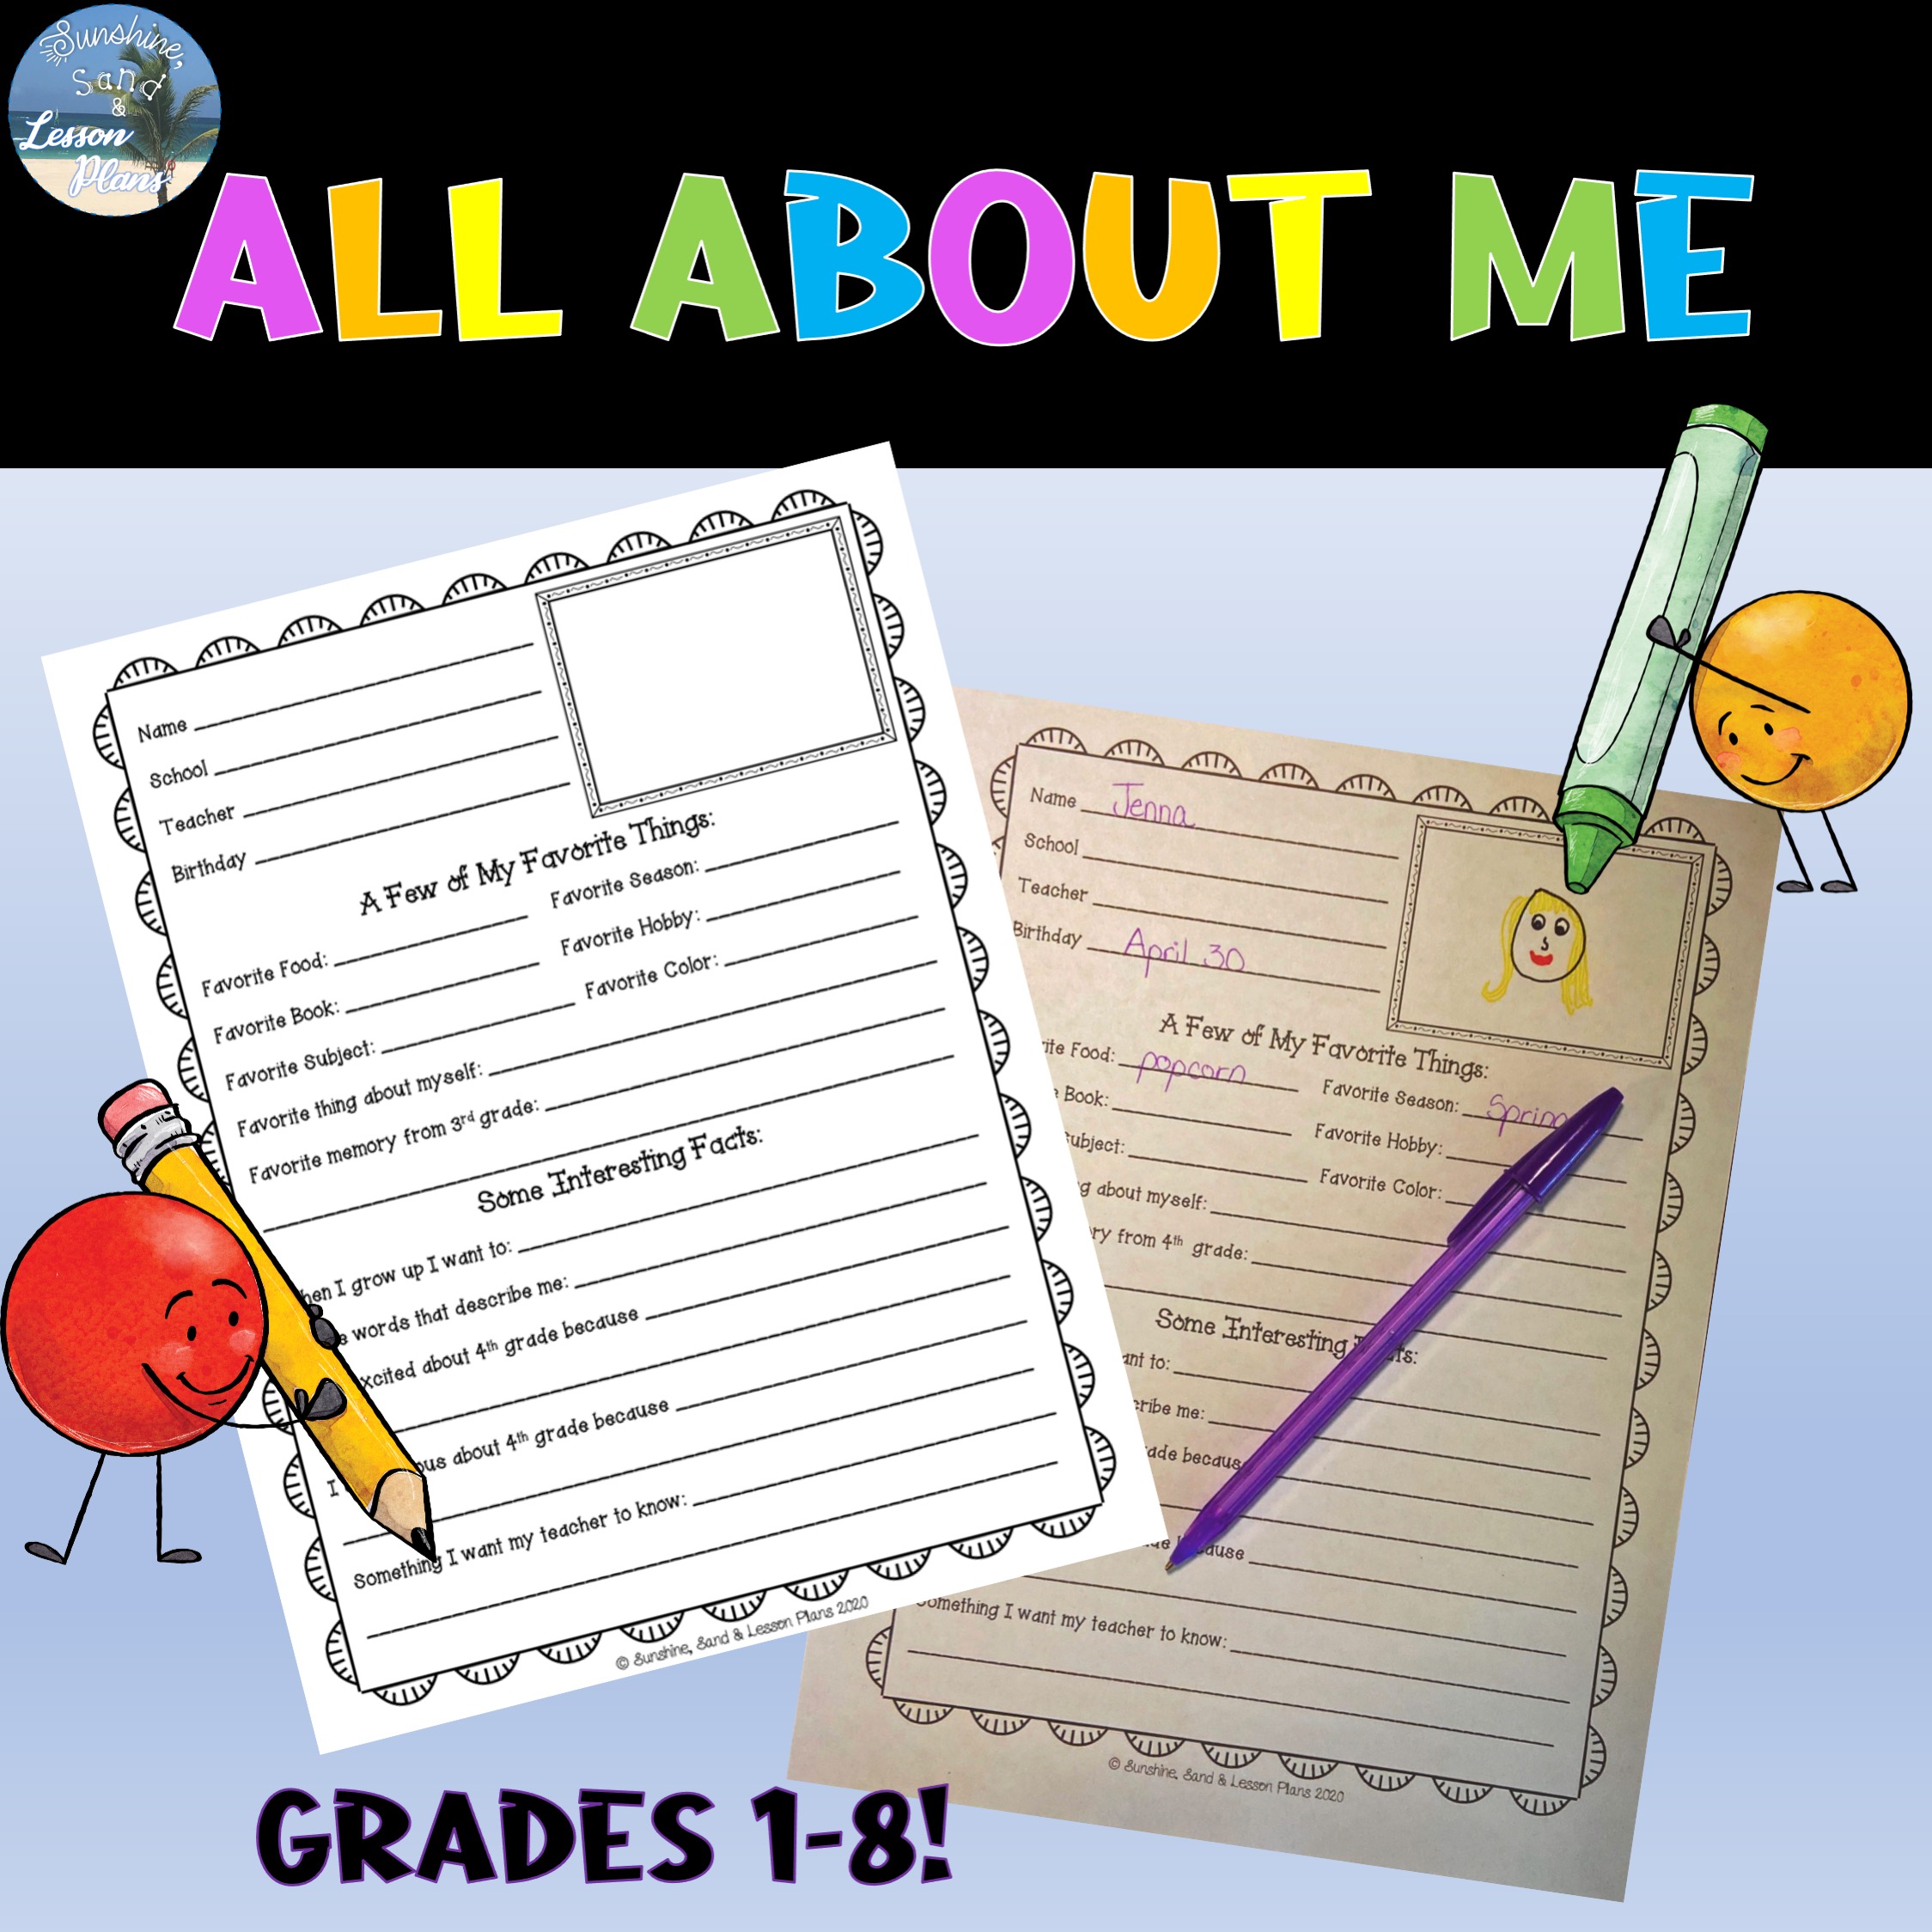 All About Me Activity's featured image